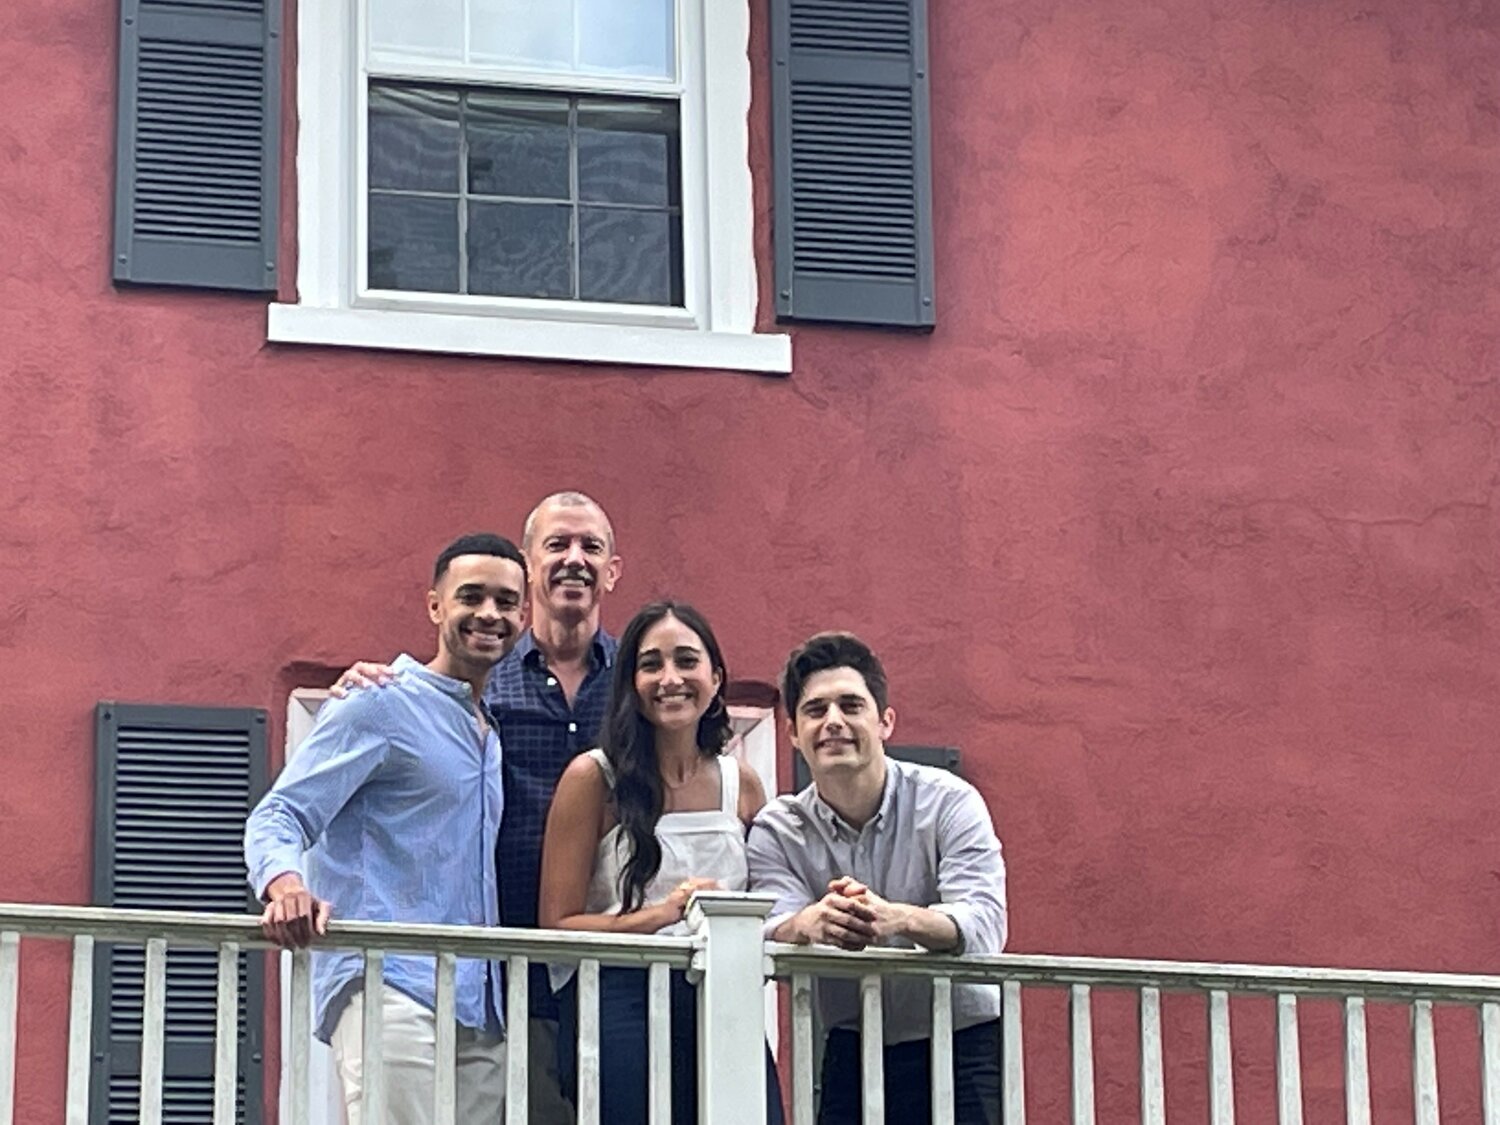 (From left) Noah J. Ricketts, Alex Fraser,  Krystina Alabado and Andy Mientus stand on the balcony at the Hammerstein home. Fraser is producing director for the Bucks County Playhouse, which is running“Tick, Tick...Boom!”  this month. Ricketts, Alabado and Mientus are cast members in the production.